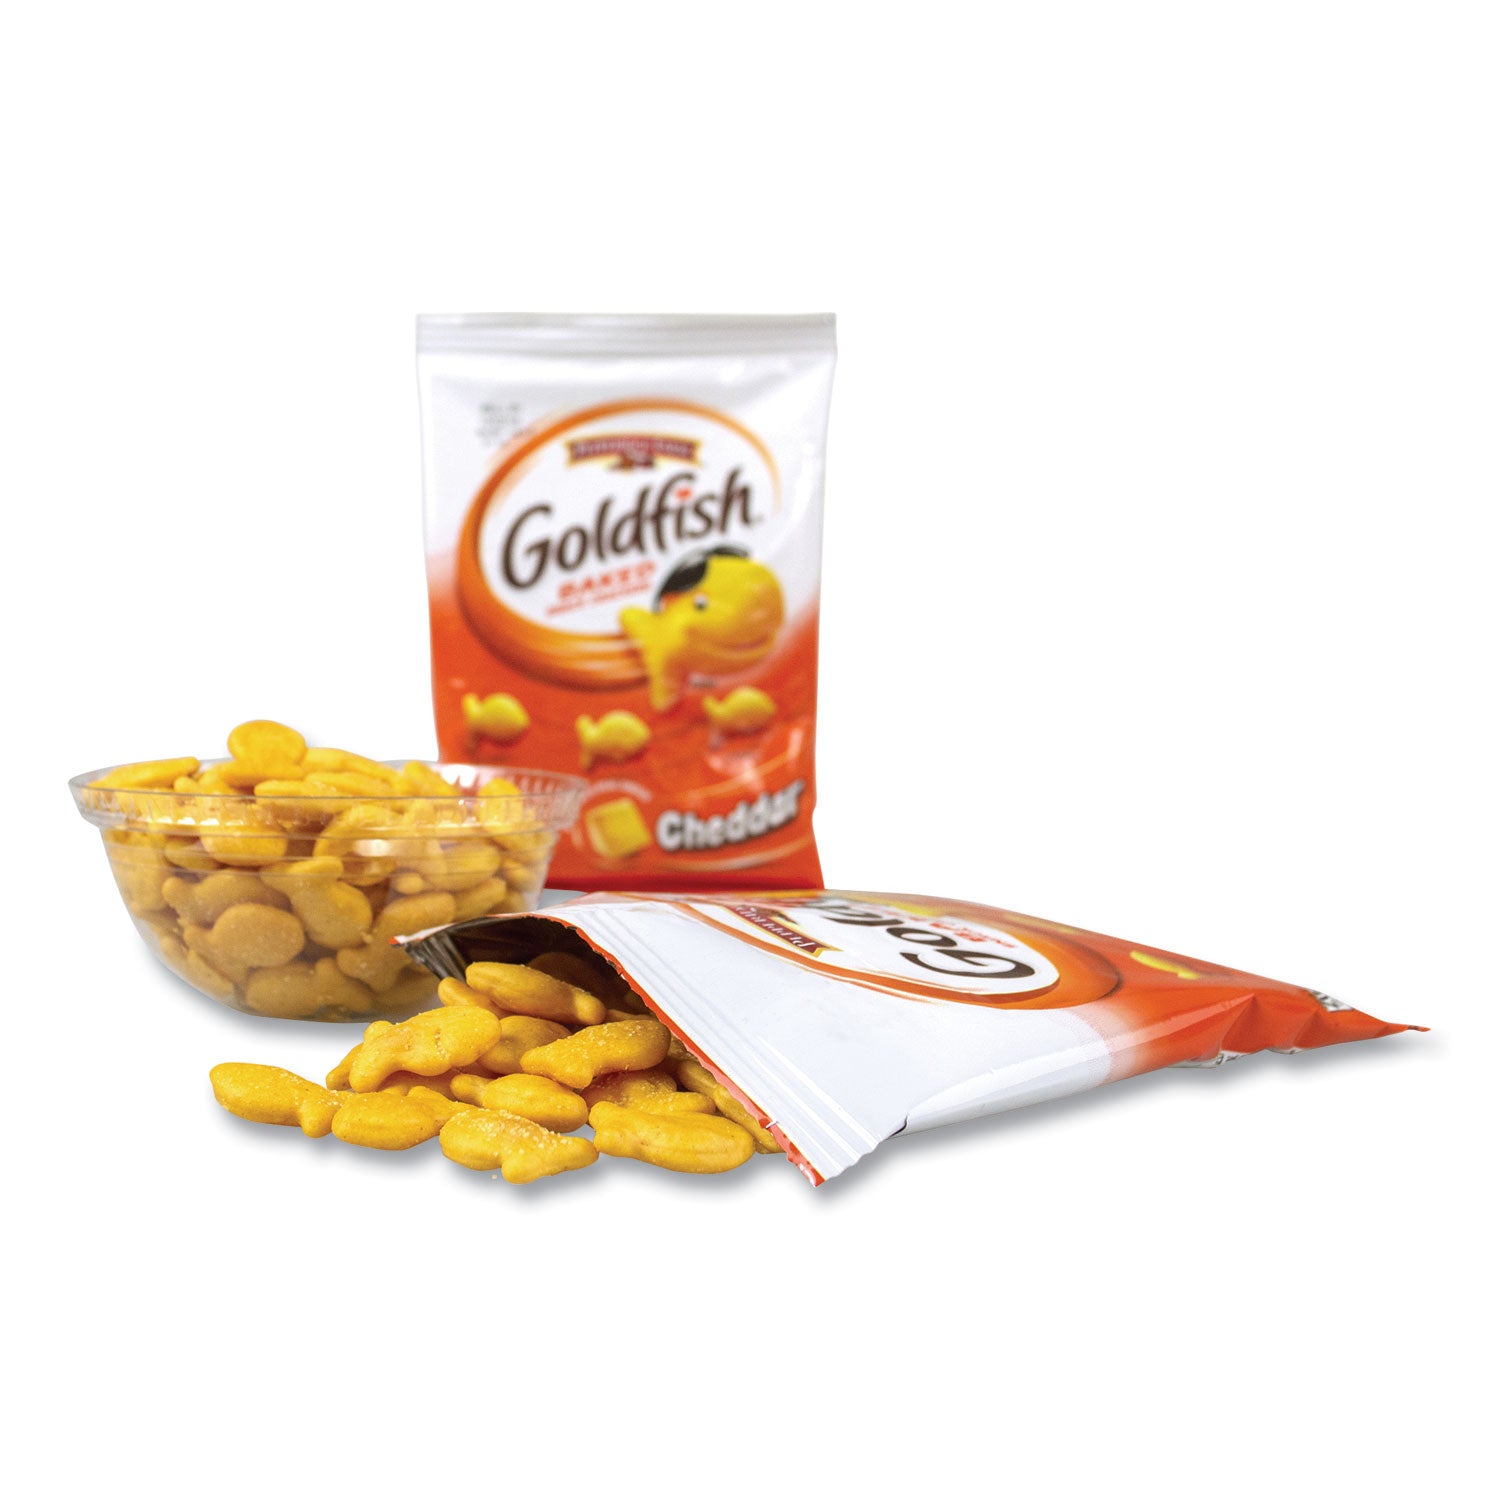 goldfish-crackers-cheddar-15-oz-bag-30-bags-box-ships-in-1-3-business-days_grr22000493 - 1